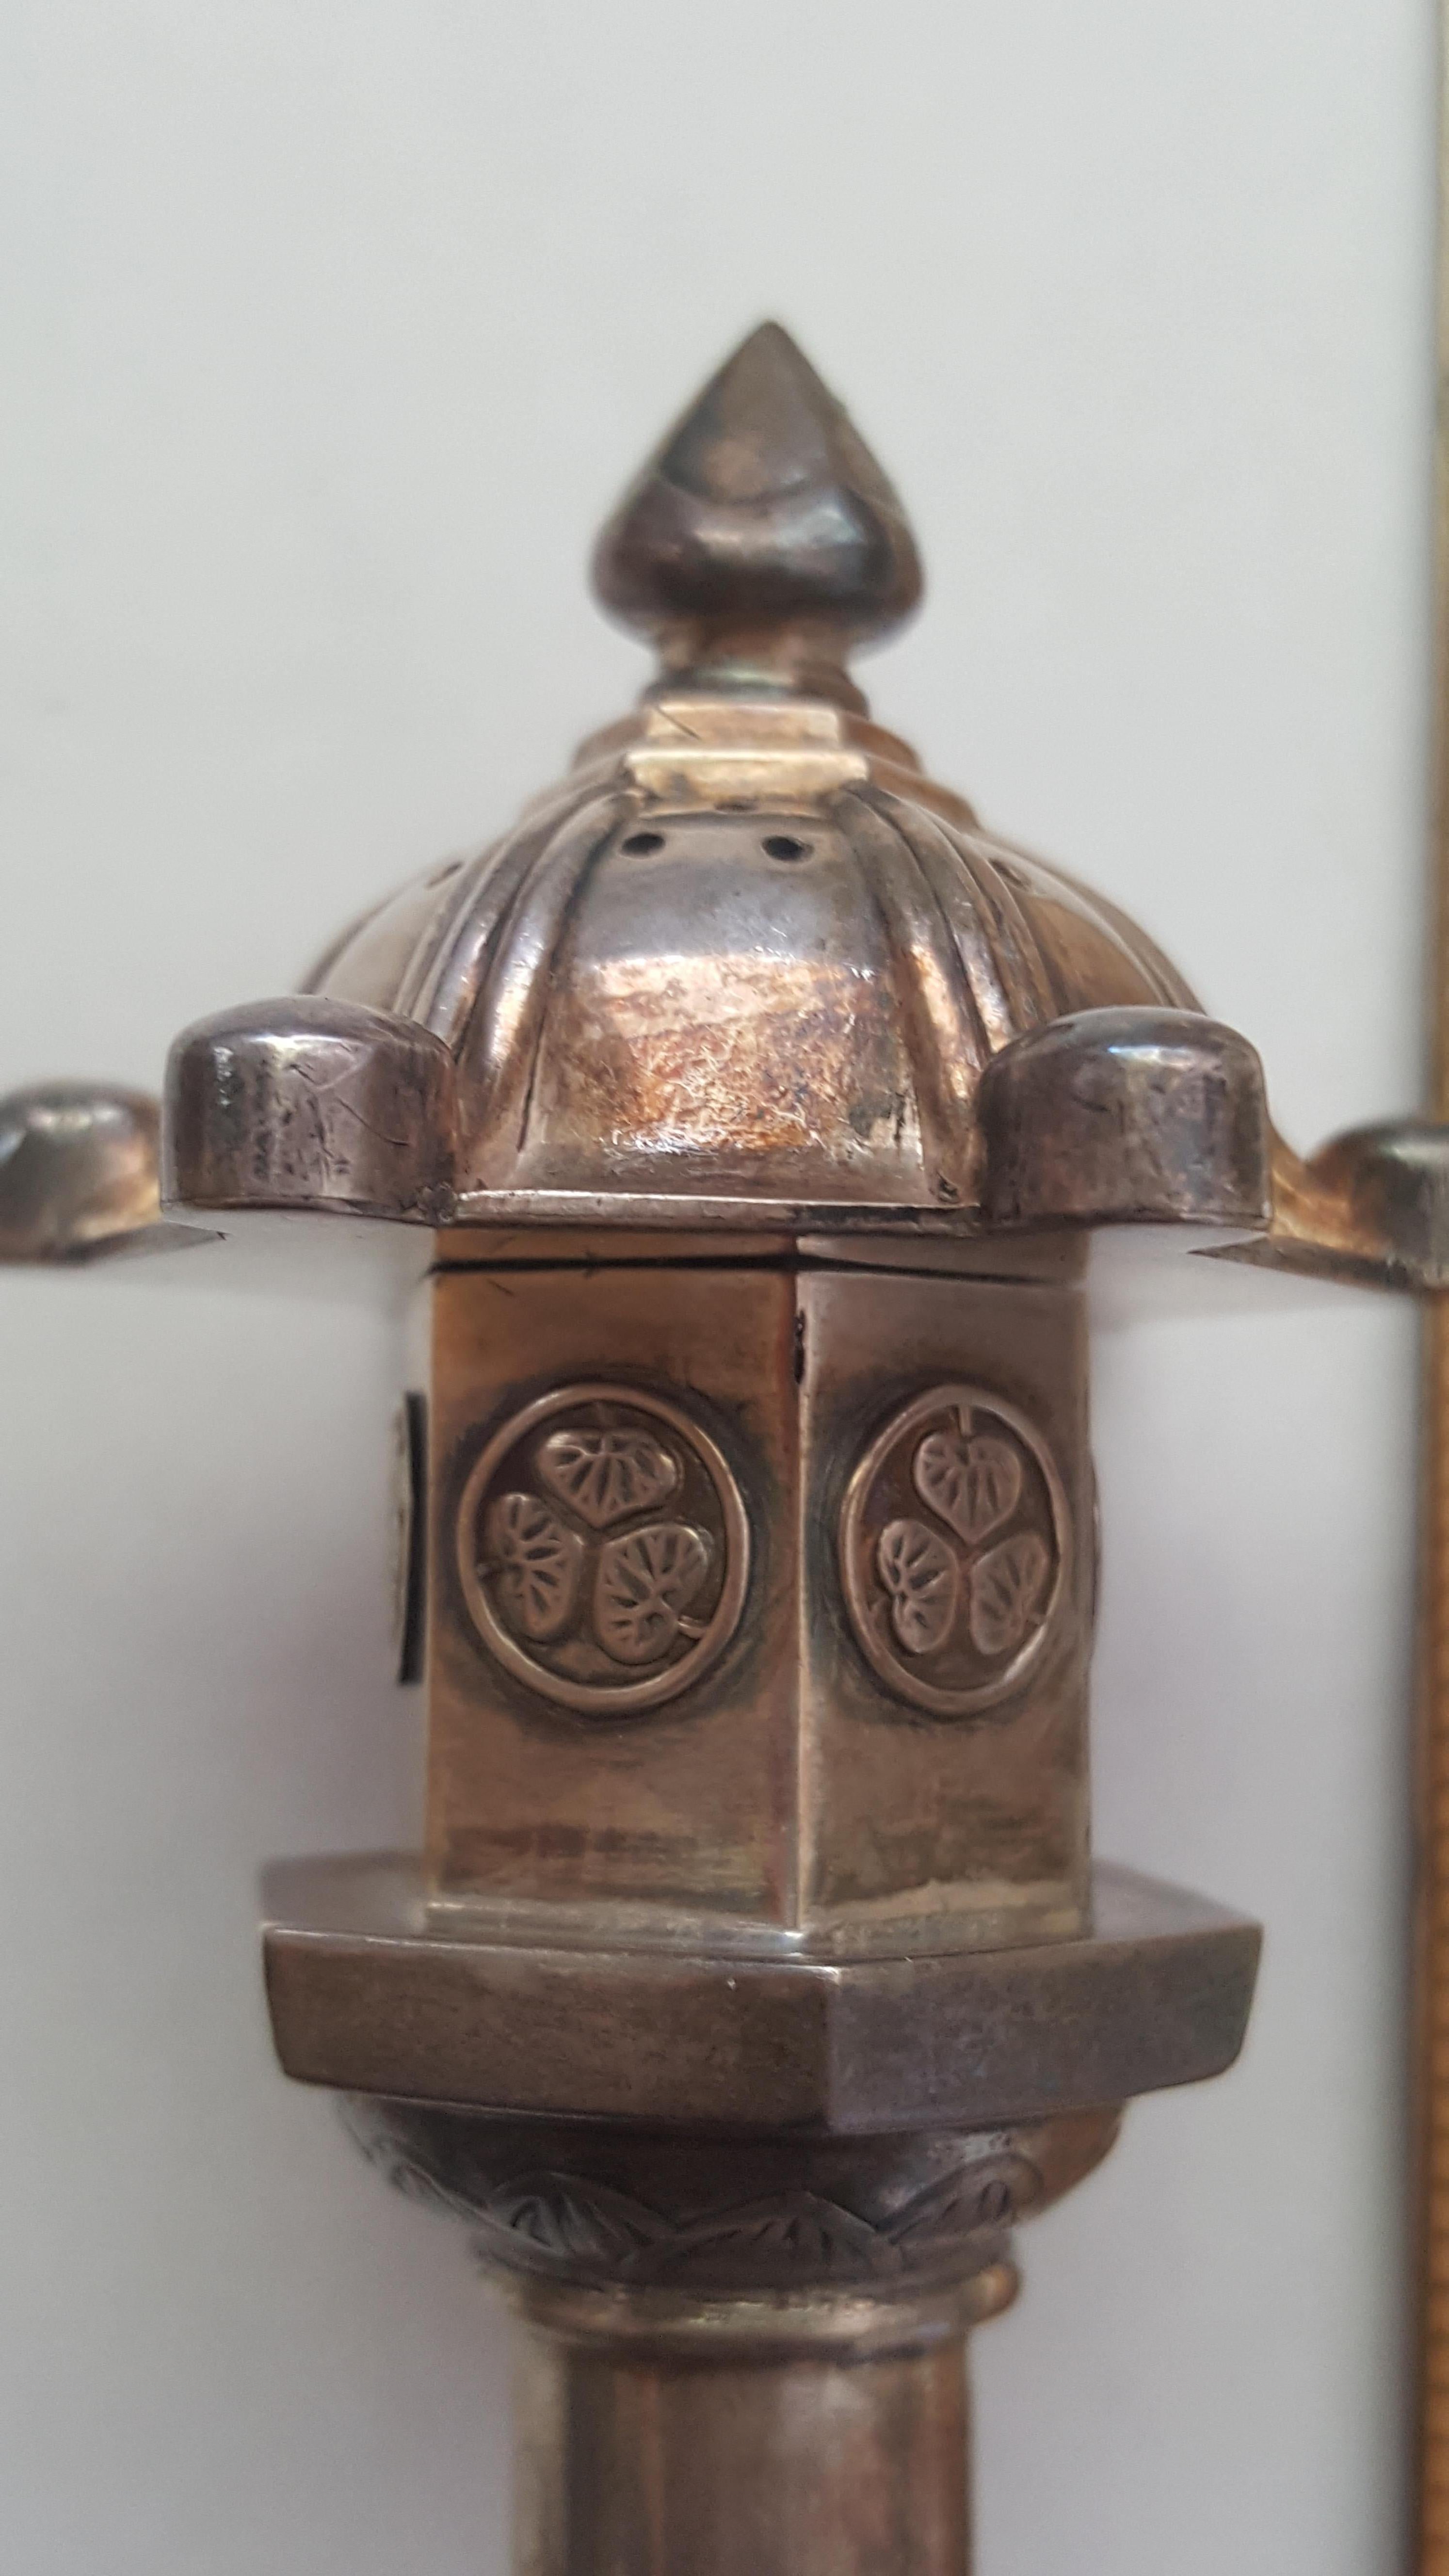 Vintage Sterling Silver Salt and Pepper Shakers, Japanese, Pagona Latern In Good Condition For Sale In Rancho Santa Fe, CA